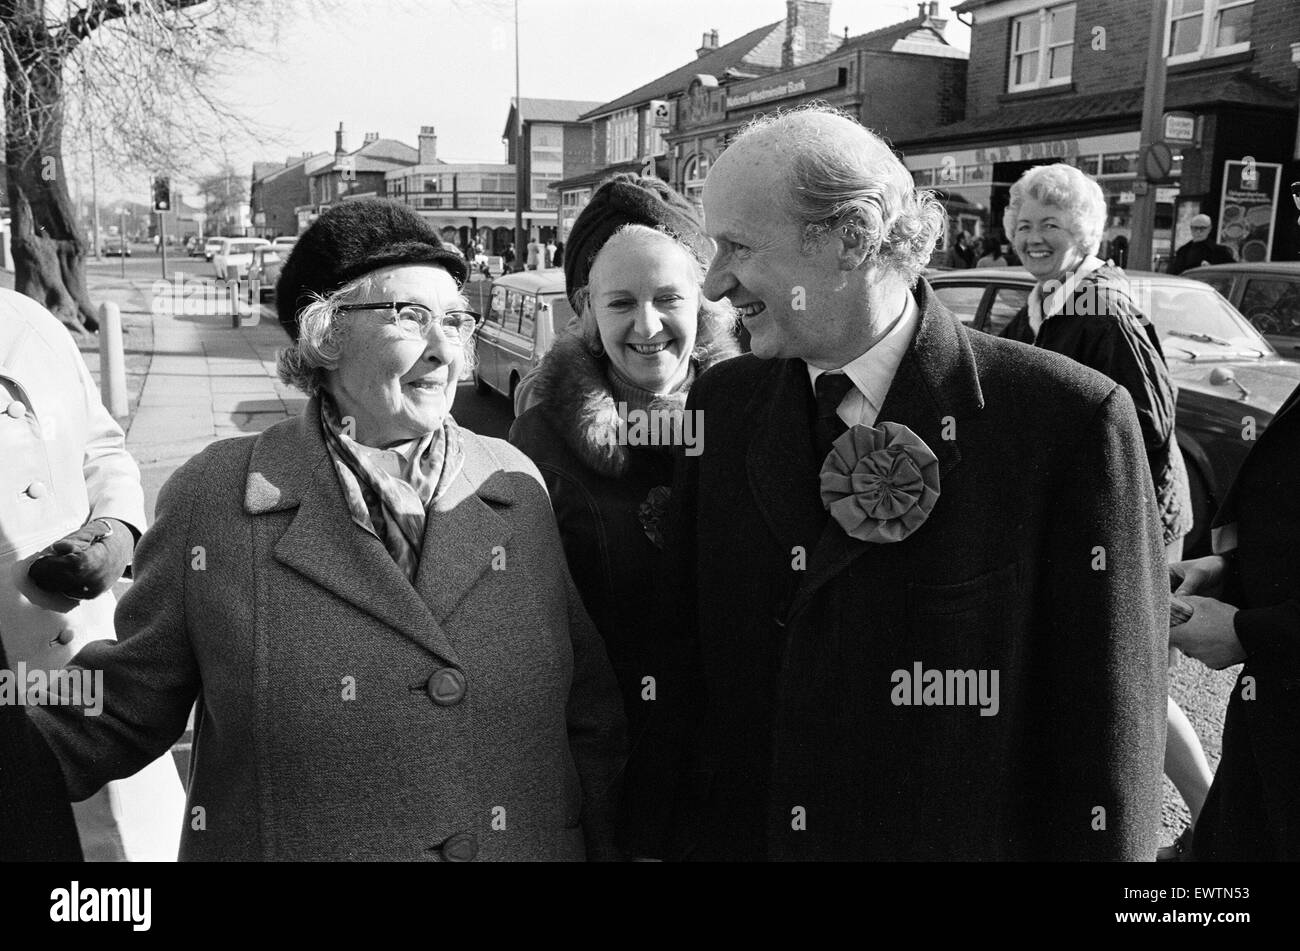 Anthony Barber, Chancellor of the Exchequer and Conservative Member of Parliament for Altrincham and Sale, pictured campaigning in Altrincham and Sale, Greater Manchester, ahead of 1974 General Election, 23rd February 1974. Stock Photo